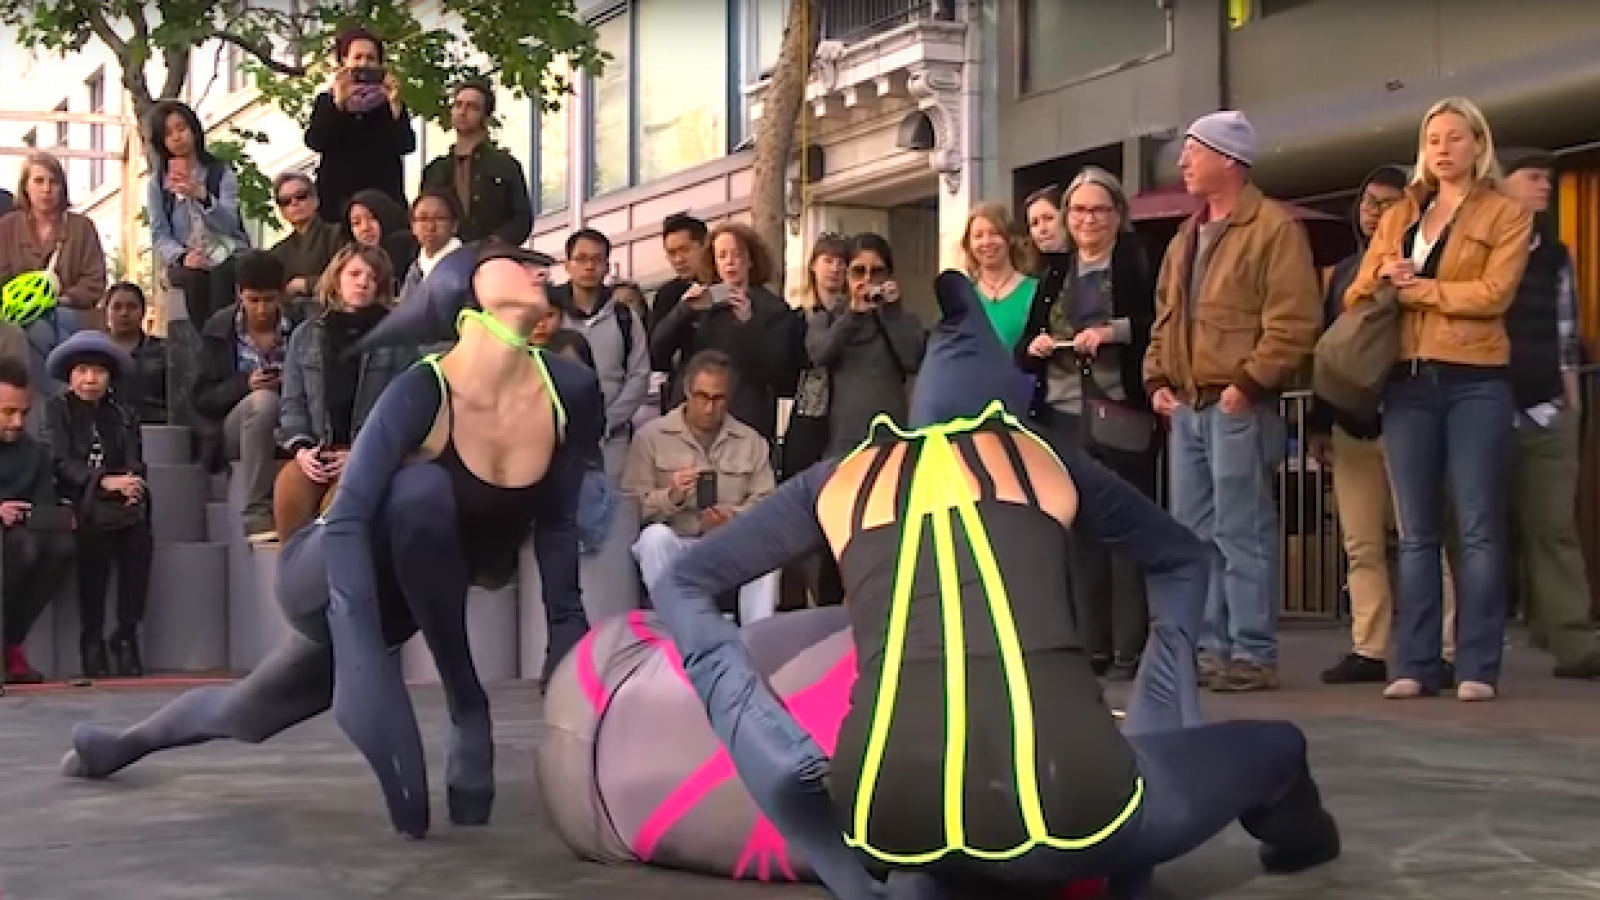 Dancers dressed as bugs dance on a city sidewalk for a crowd.